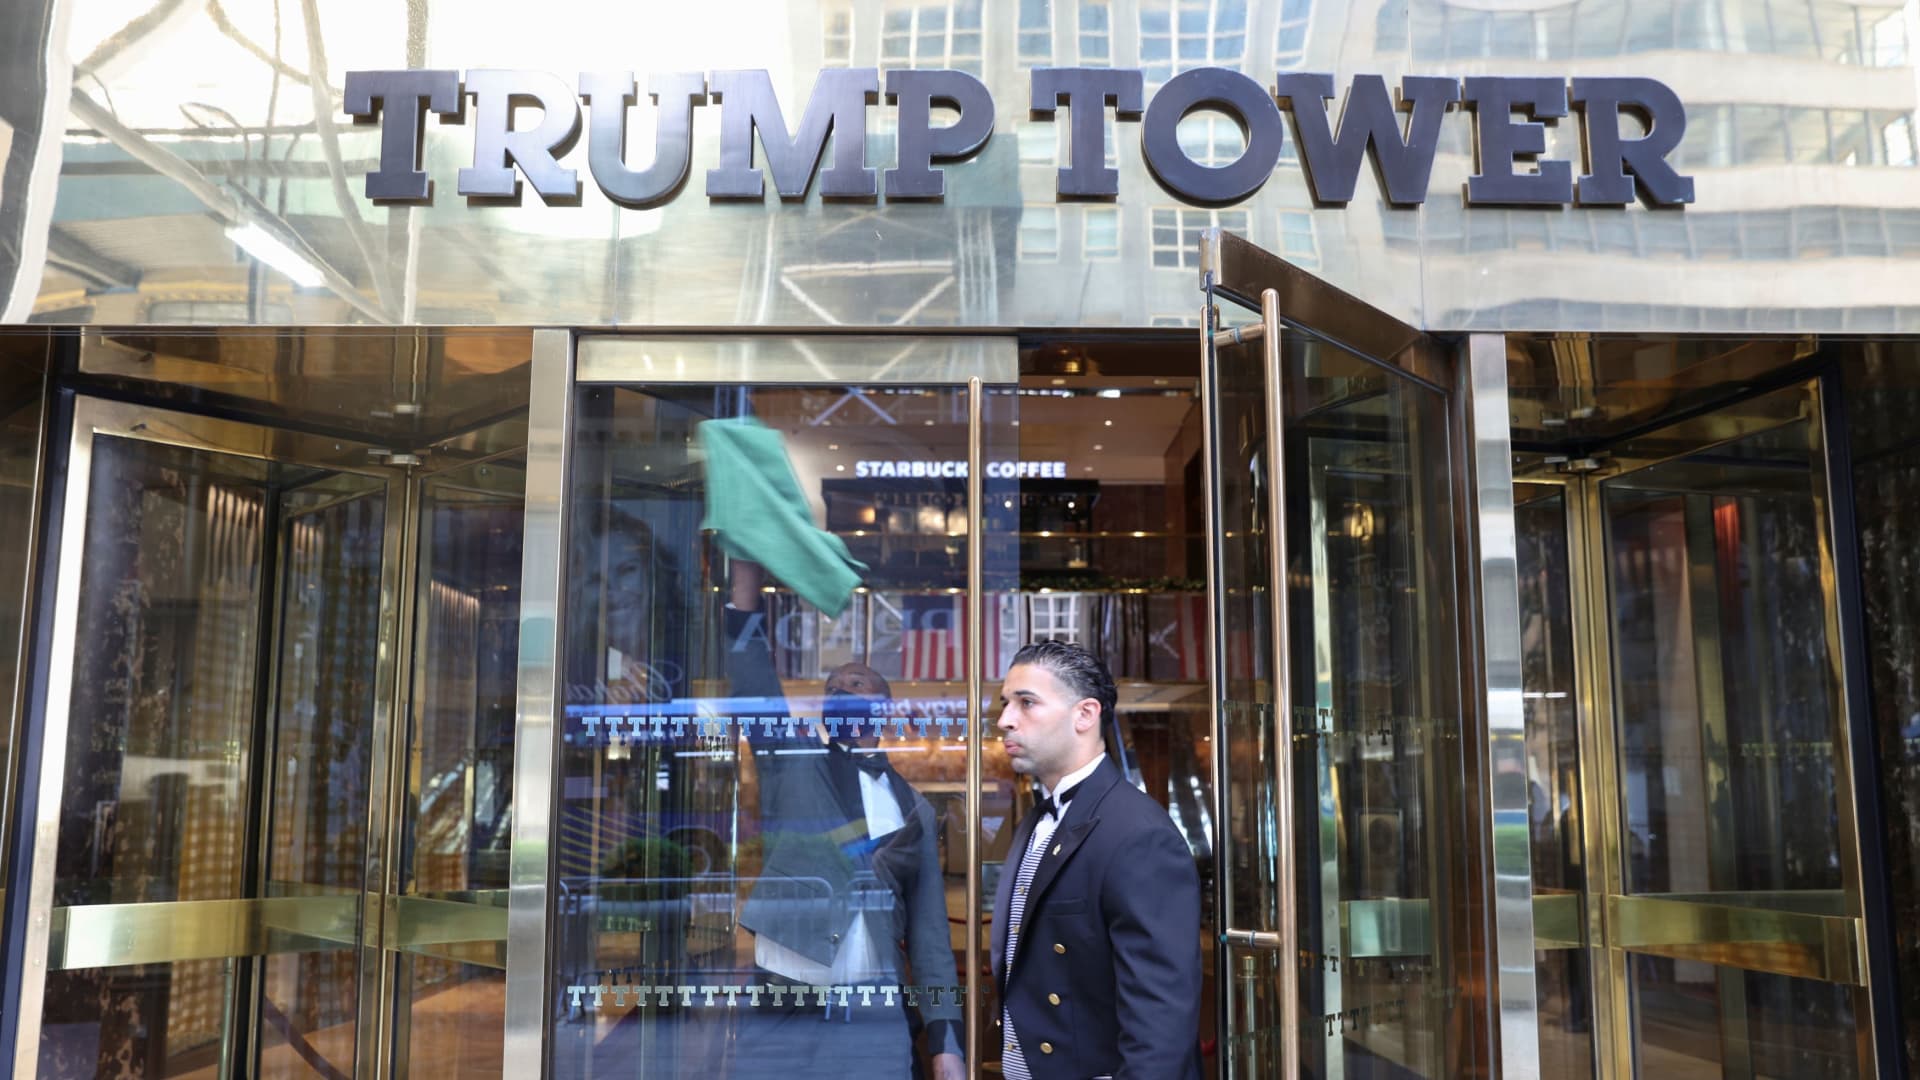 The entrance to Trump Tower on 5th Avenue is pictured in the Manhattan borough of New York City, U.S., June 30, 2021.